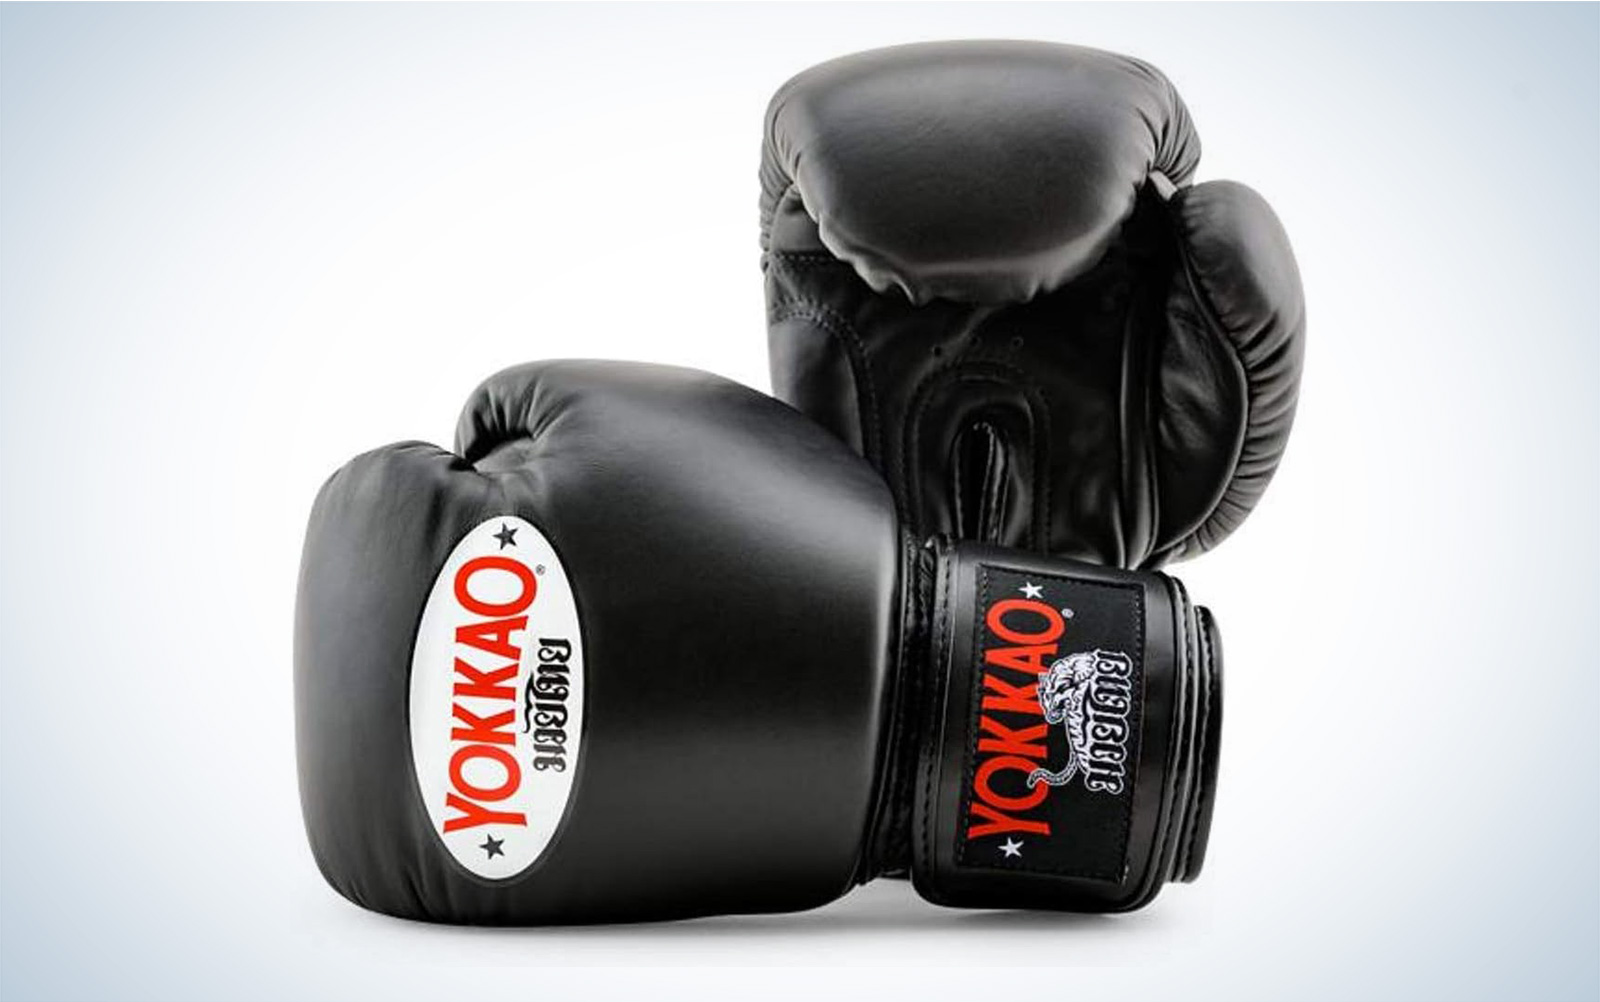 Yokkao boxing gloves are great for sparring